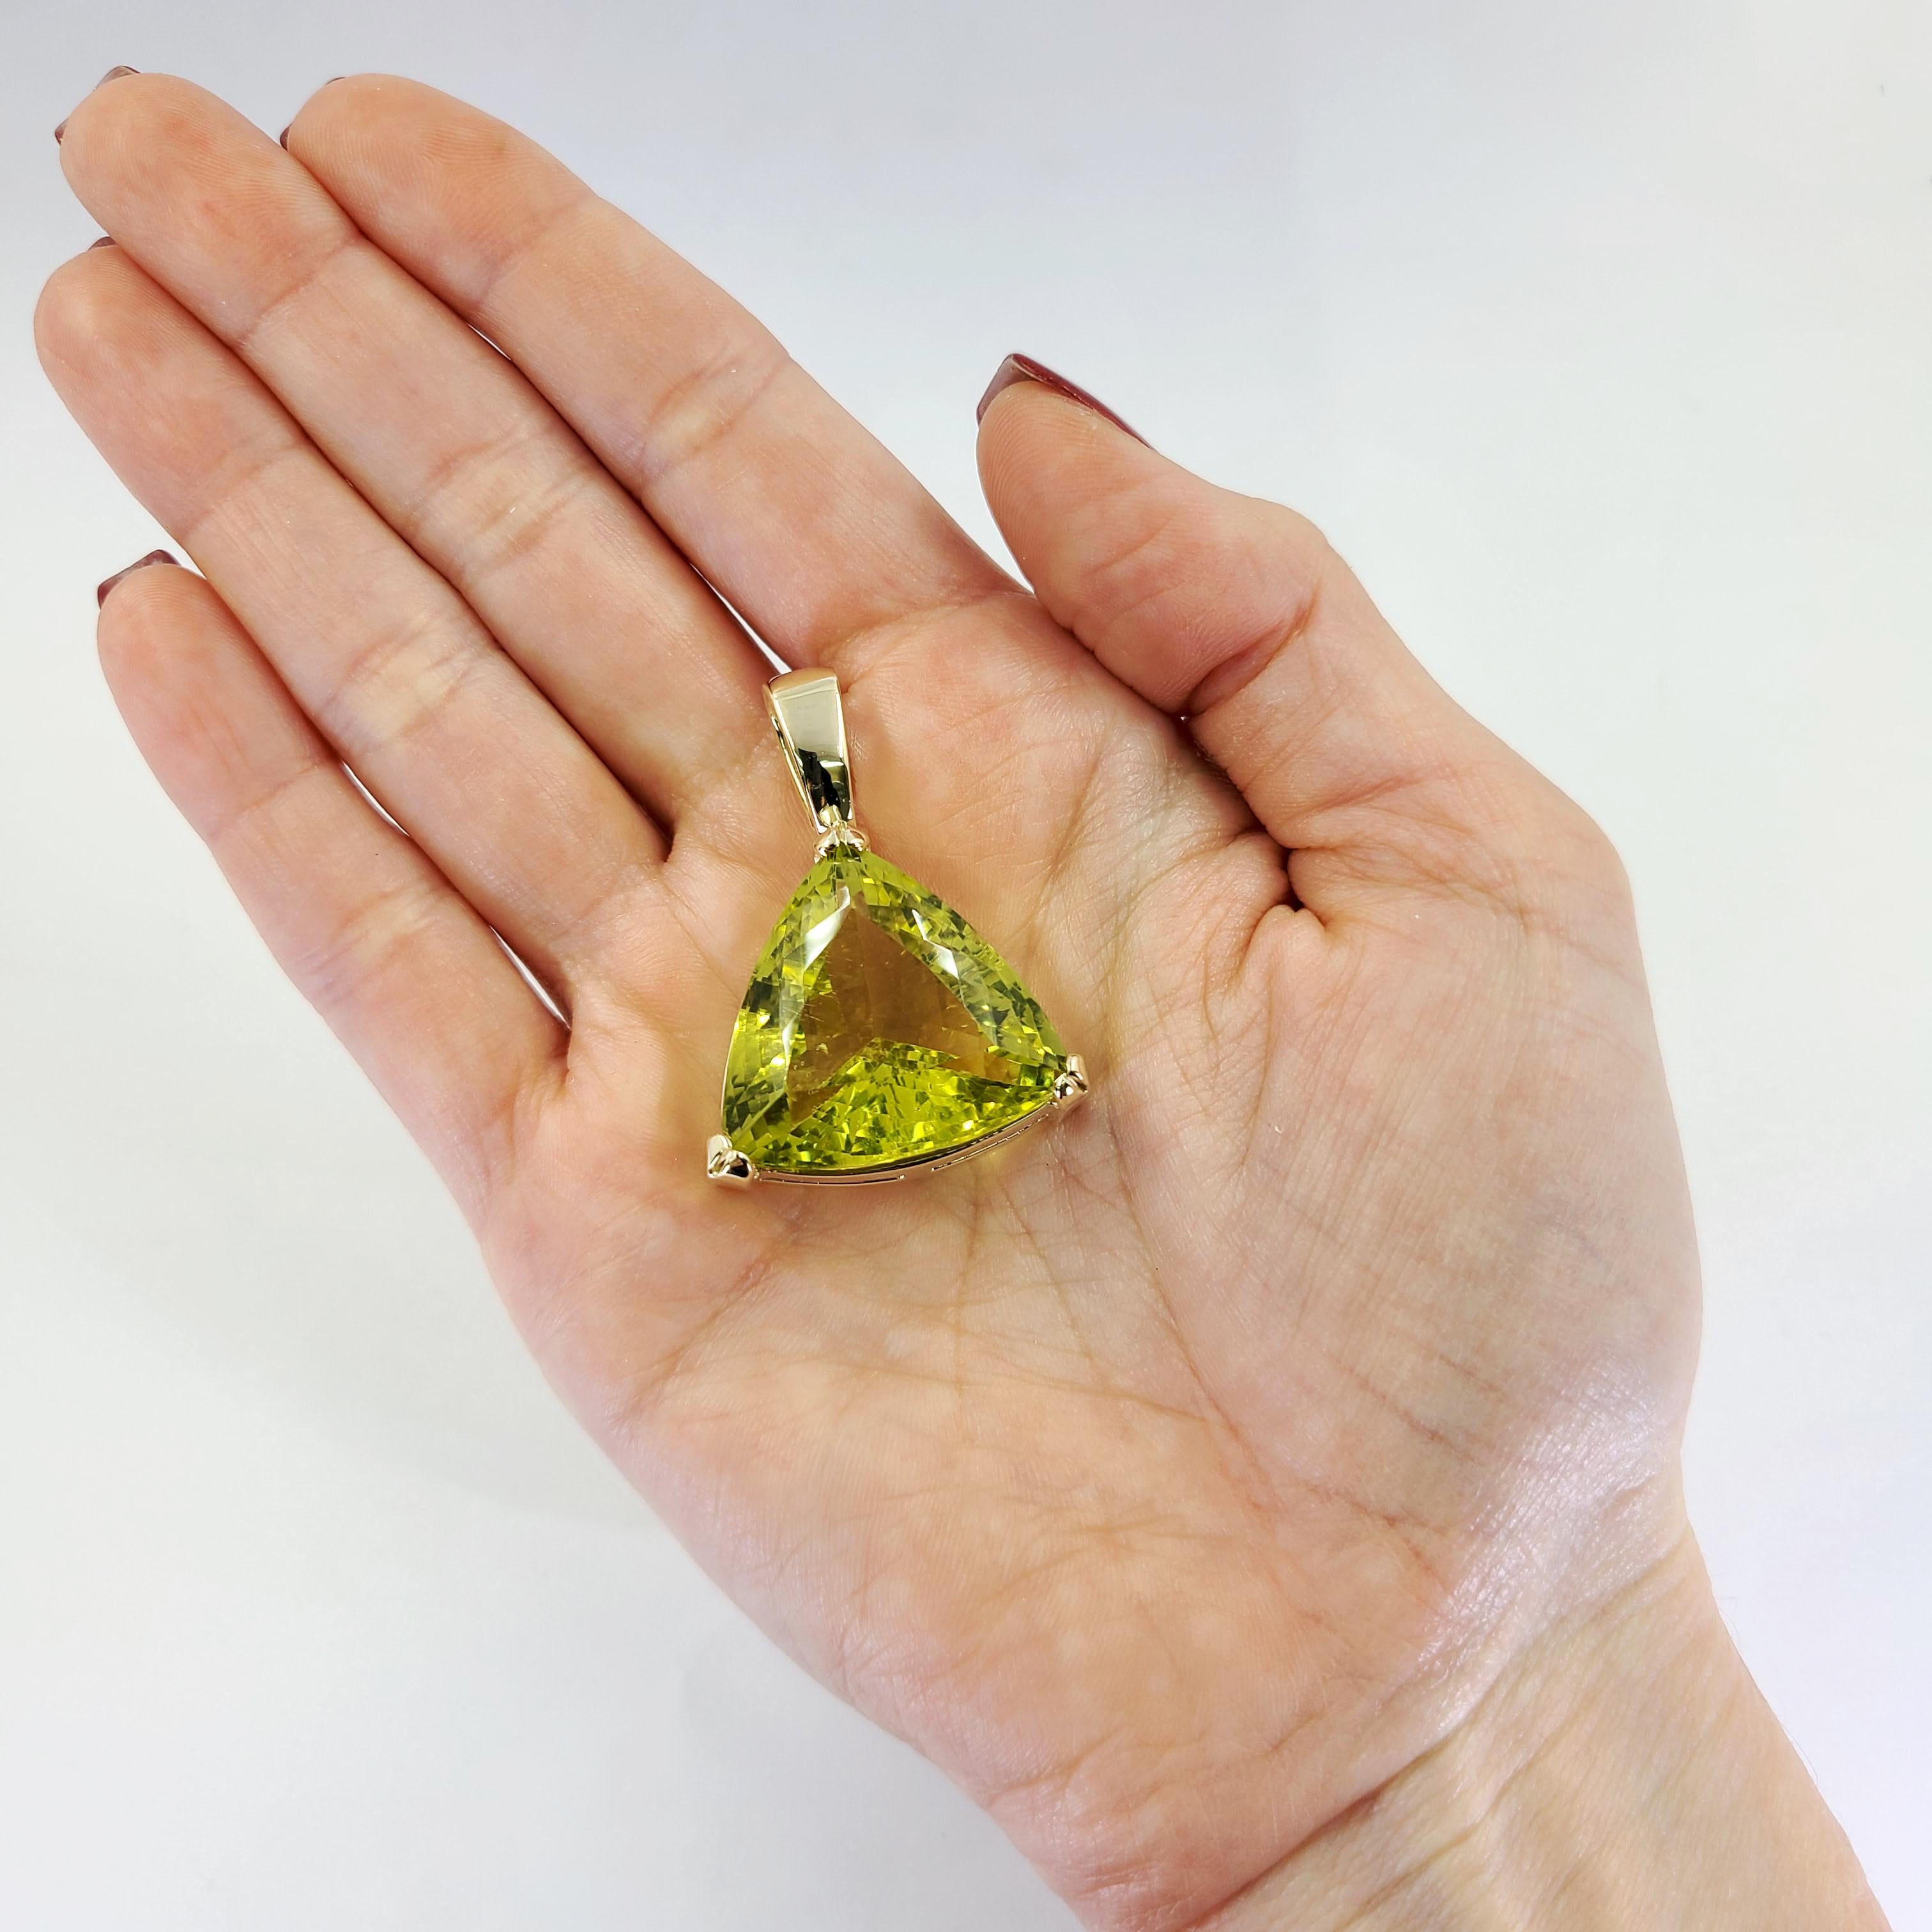 14 Karat Yellow Gold Triangular-Cut Lemon Citrine Pendant. 1.5 Inches Long. Finished Weight Is 21.1 Grams.